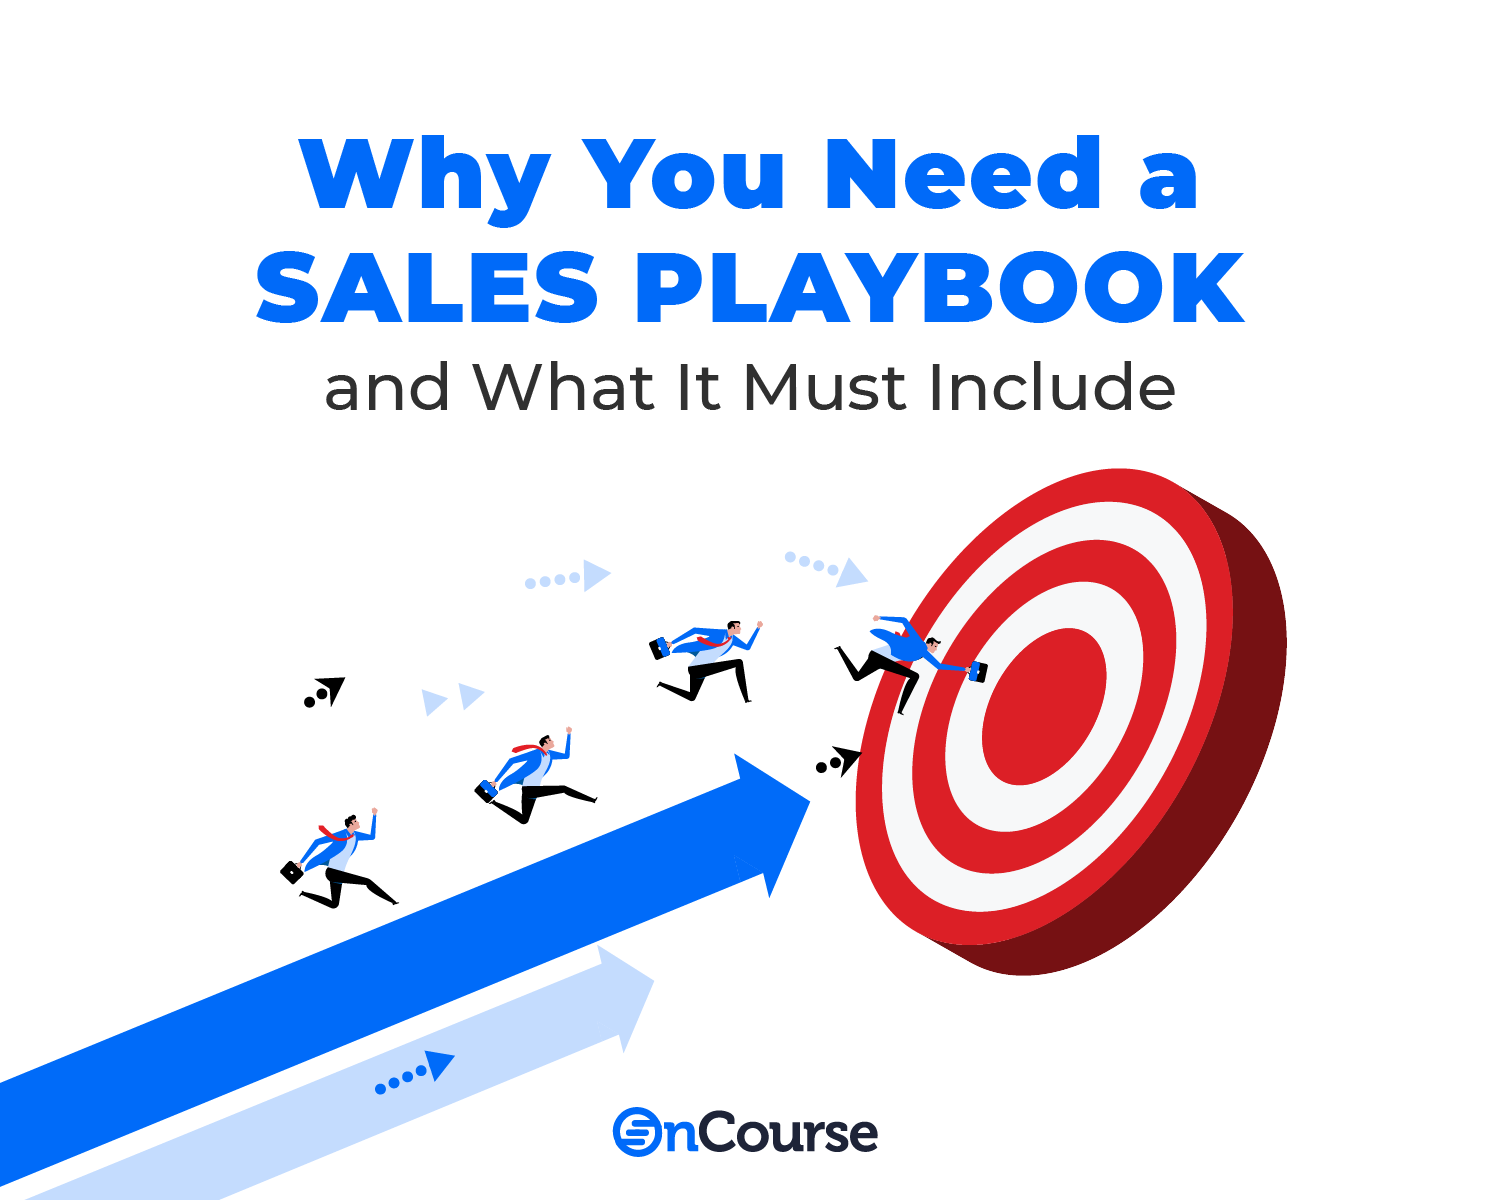 Why You Need a Sales Playbook and What It Must Include